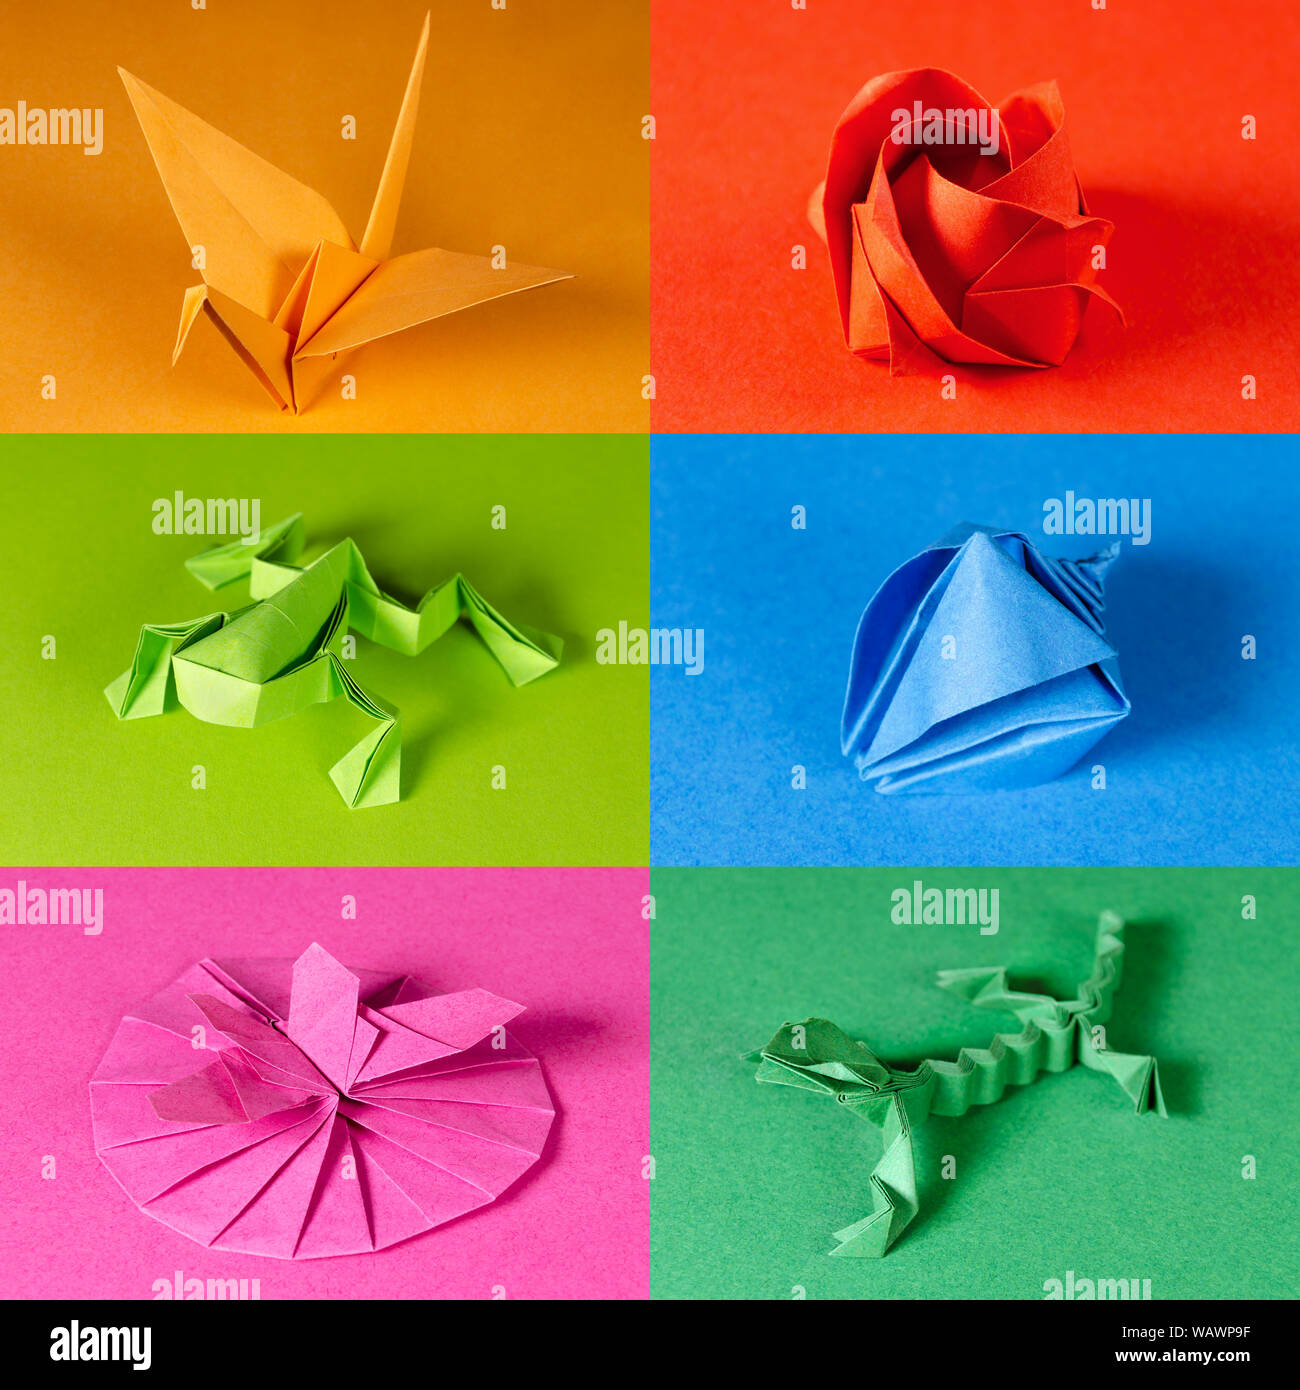 Colored origami paper figures on color backgrounds. Crane, rose, frog, sea shell, butterfly on flower and lizard. Japanese paper folding art. Stock Photo